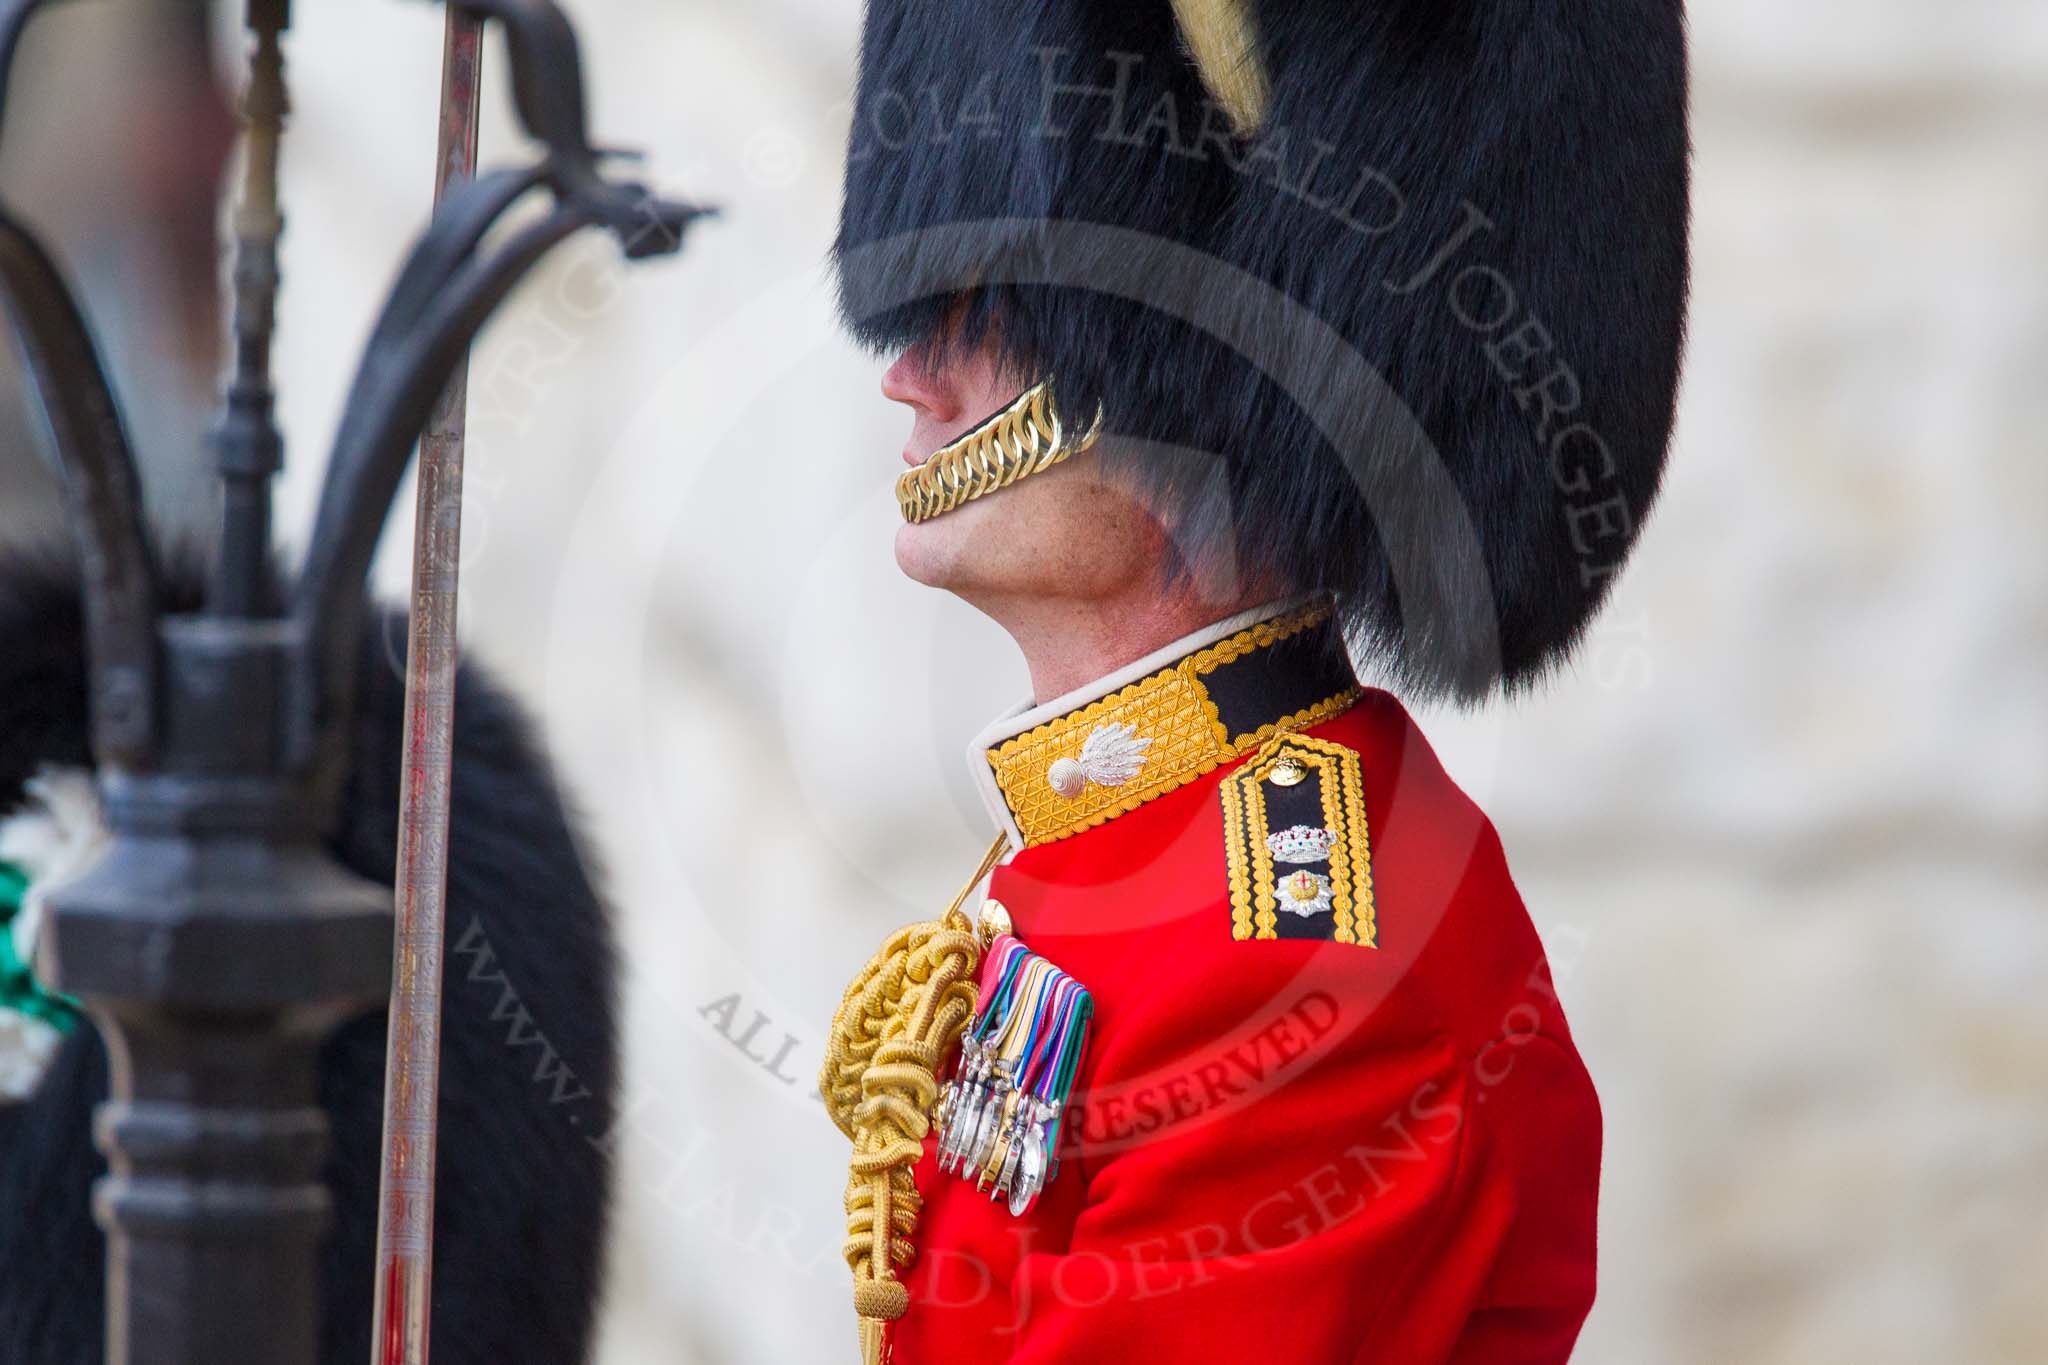 Trooping the Colour 2014.
Horse Guards Parade, Westminster,
London SW1A,

United Kingdom,
on 14 June 2014 at 10:40, image #225